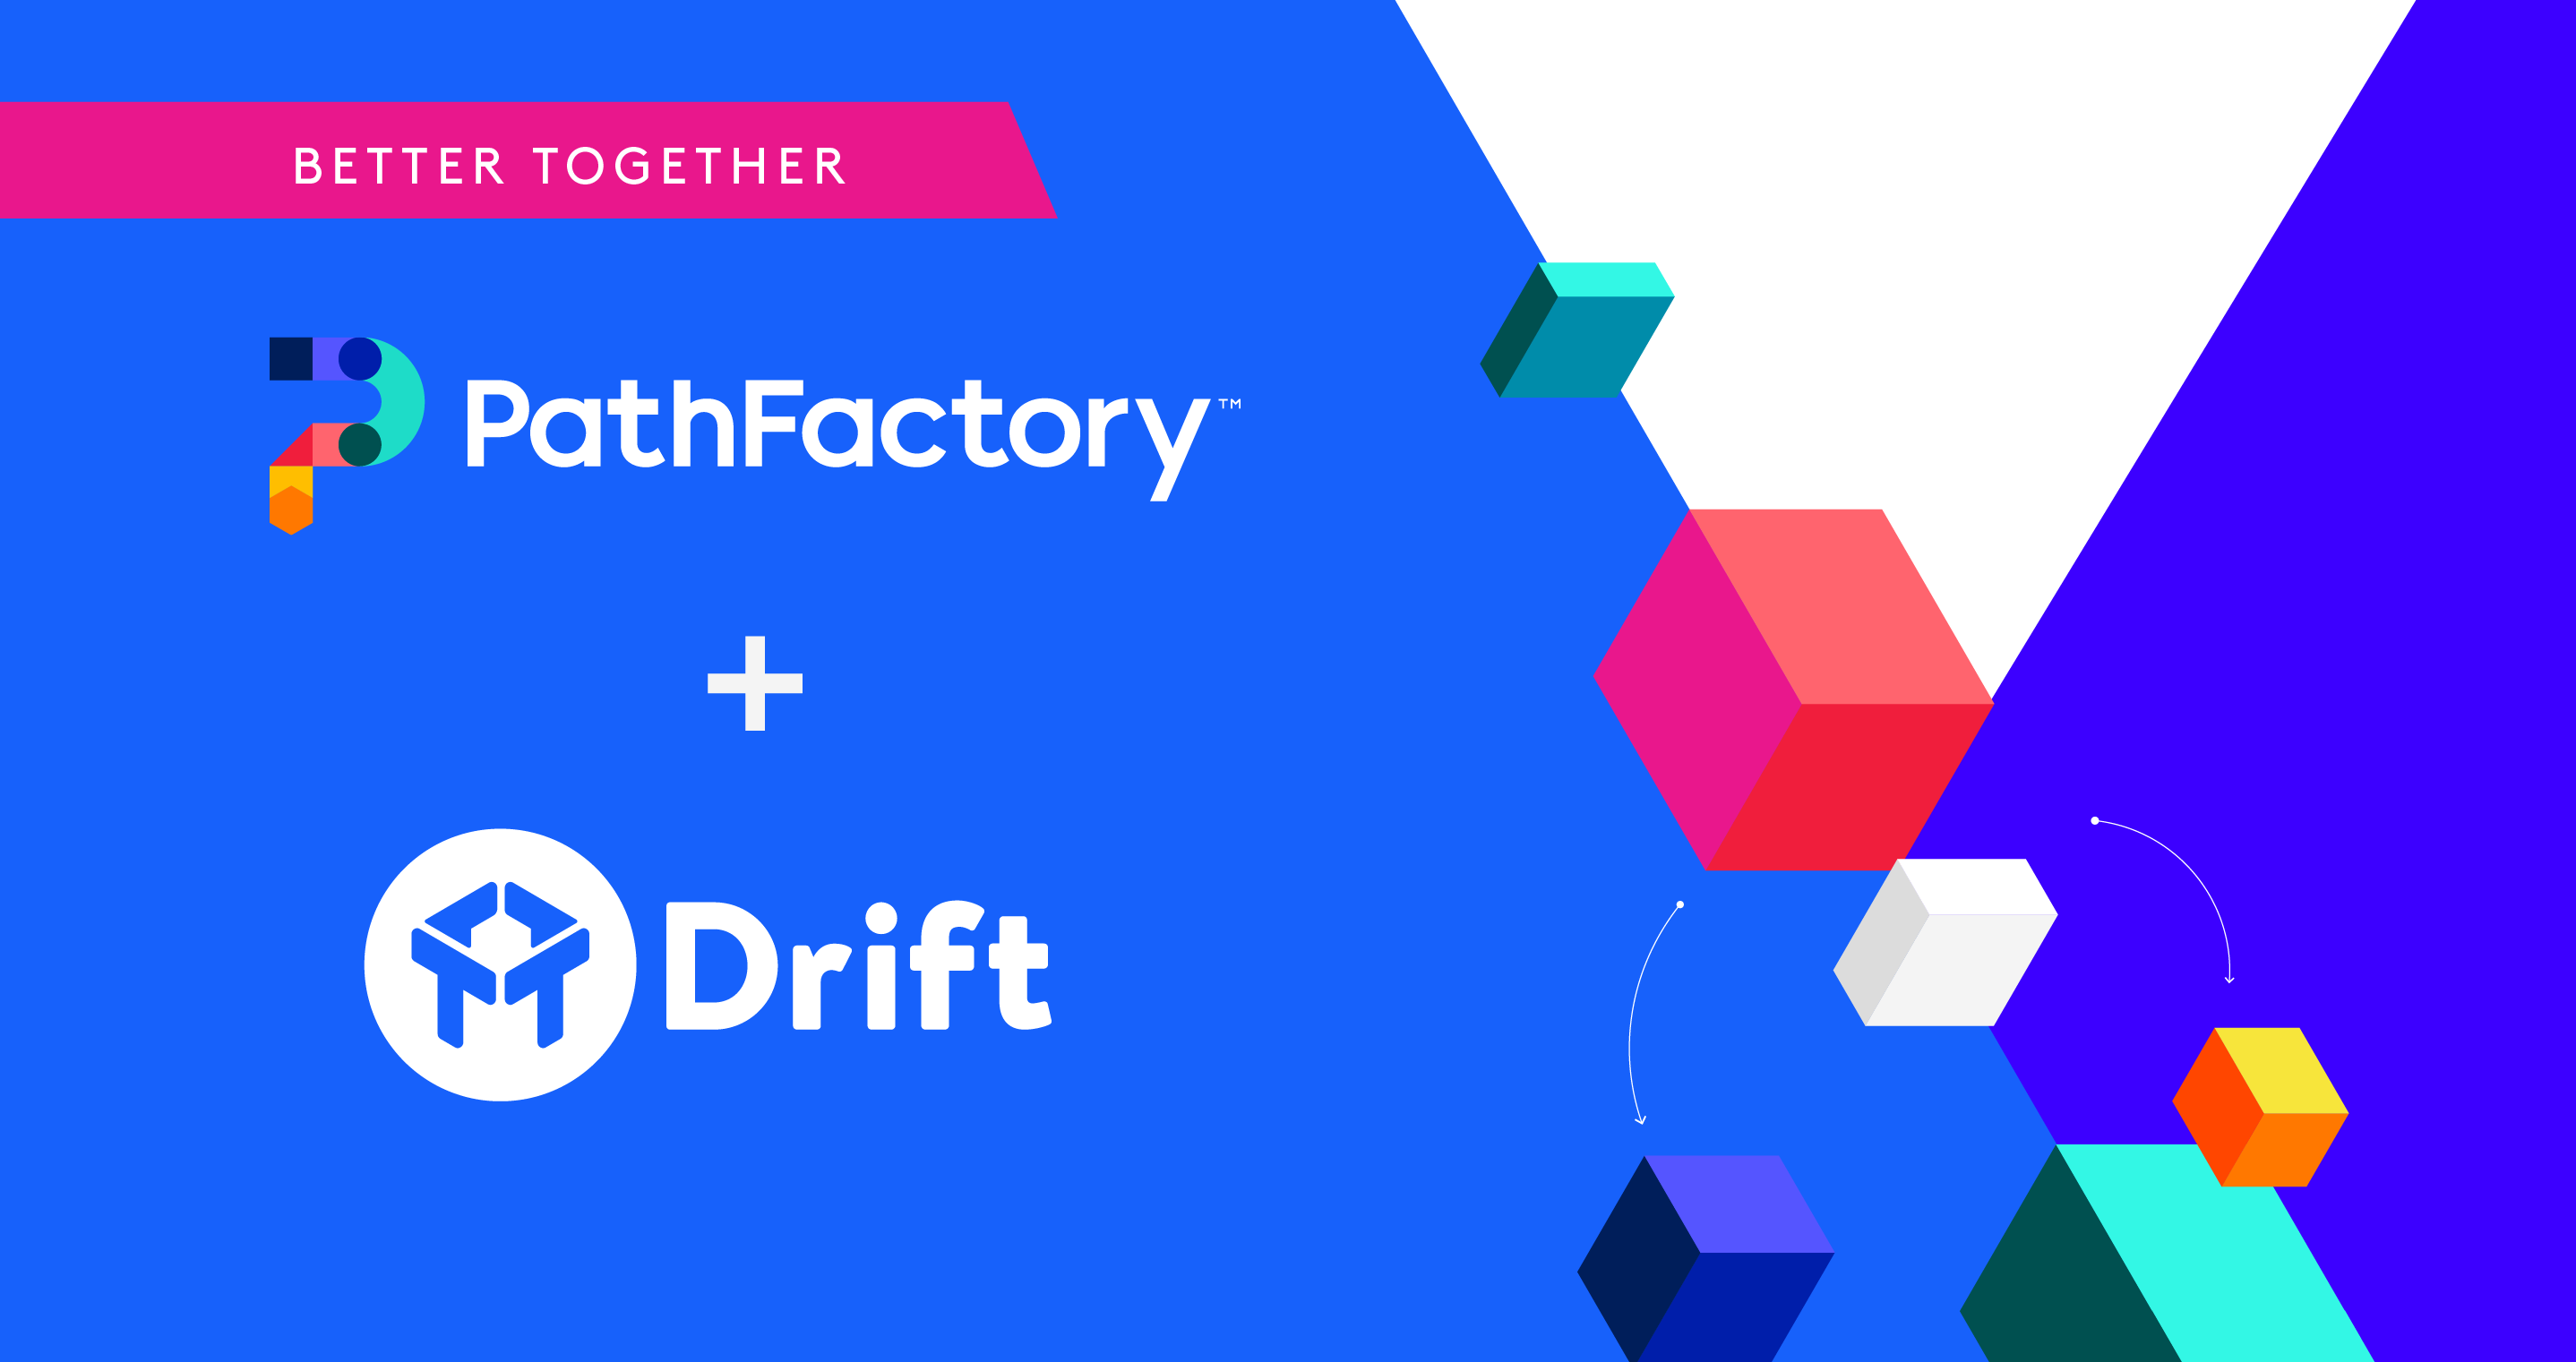 Header image with the text "Better Together: PathFactory + Drift" on a blue background with colourful shapes.